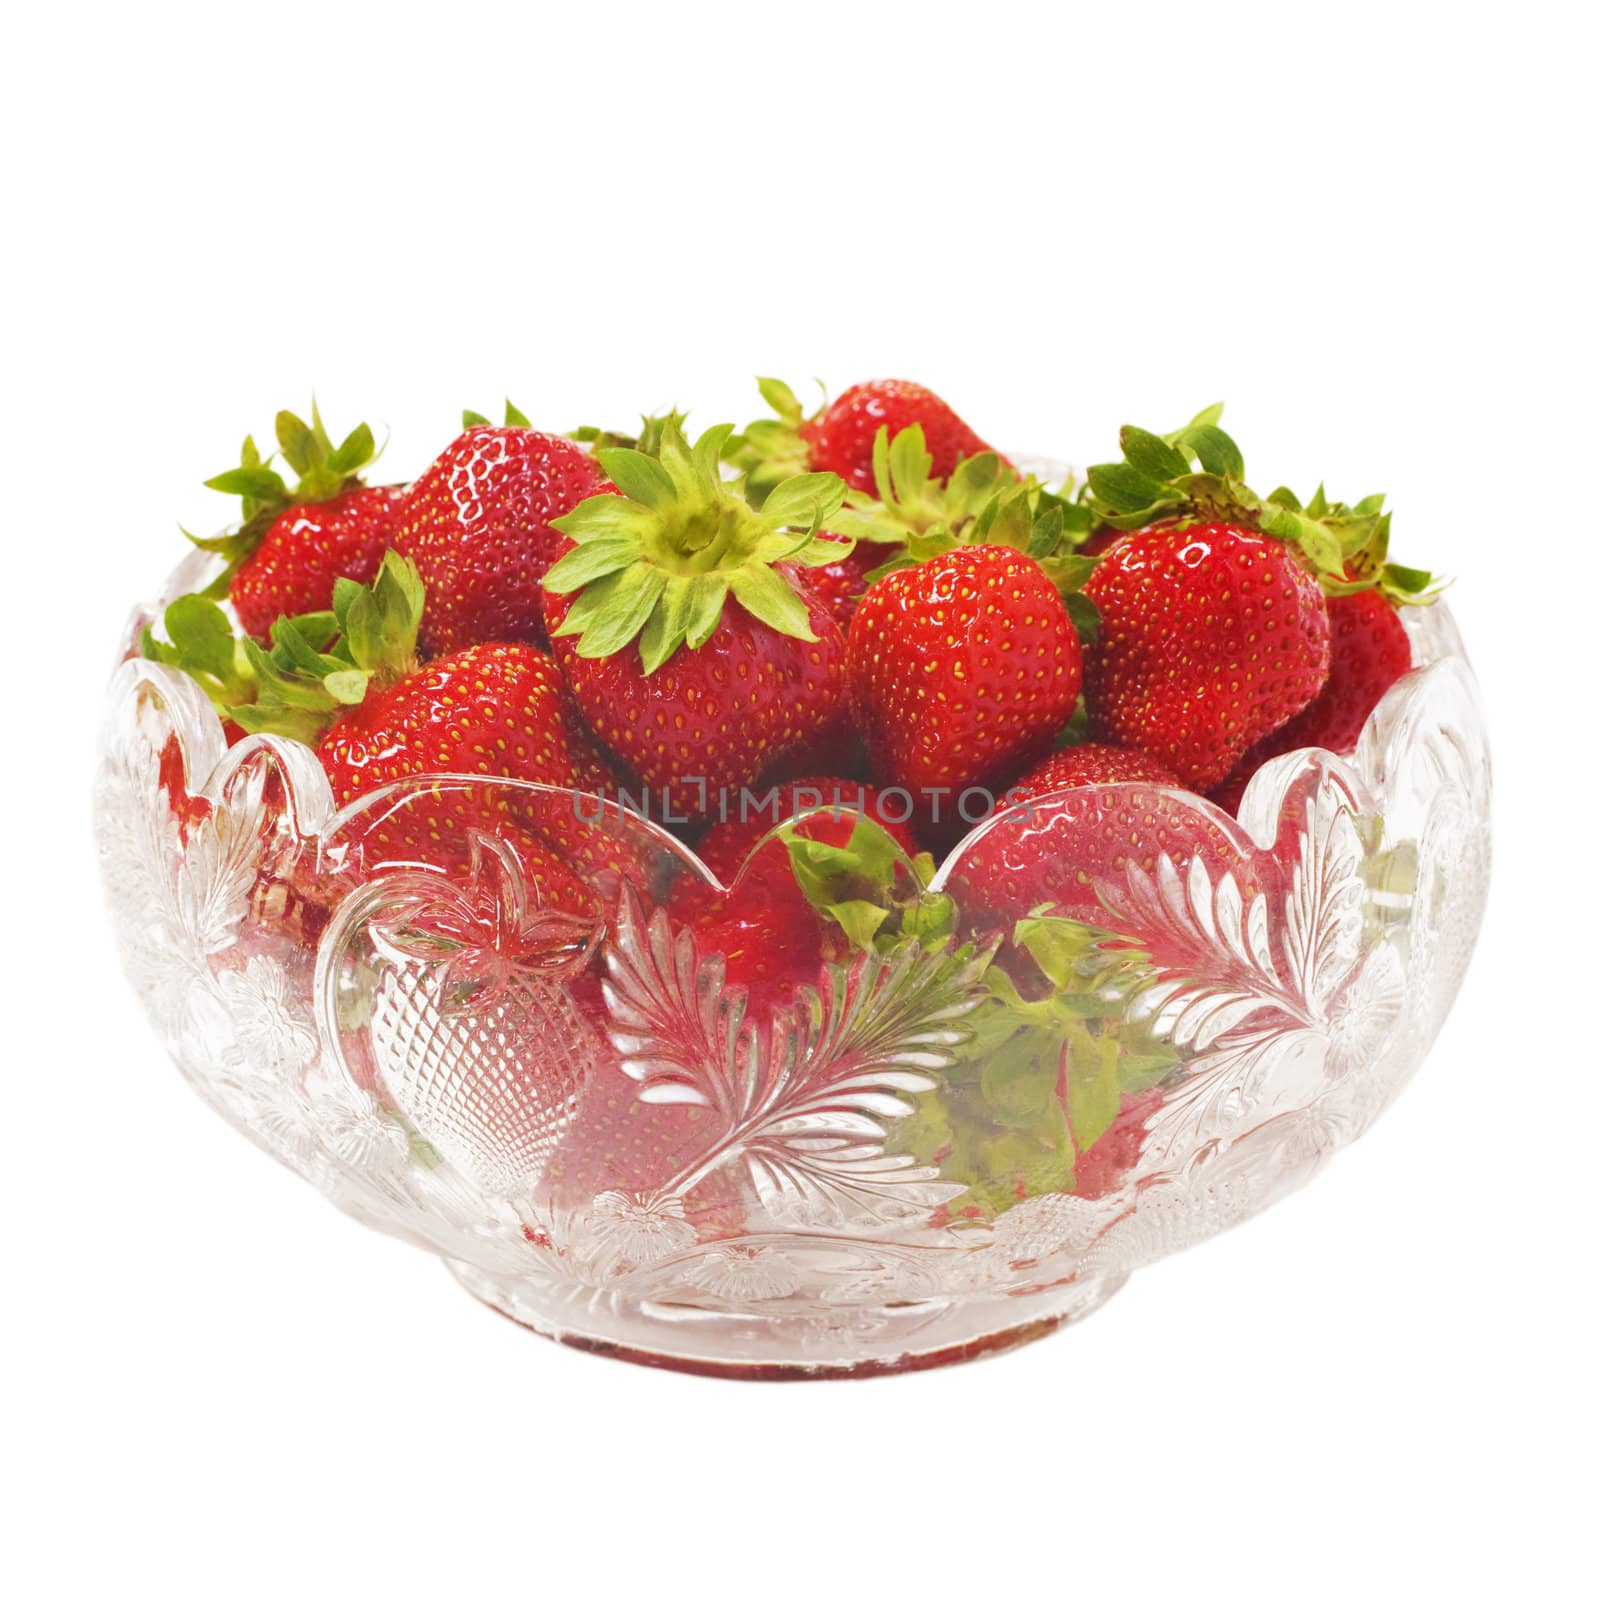 Strawberries in a Fancy Glass Bowl by Travelling-light